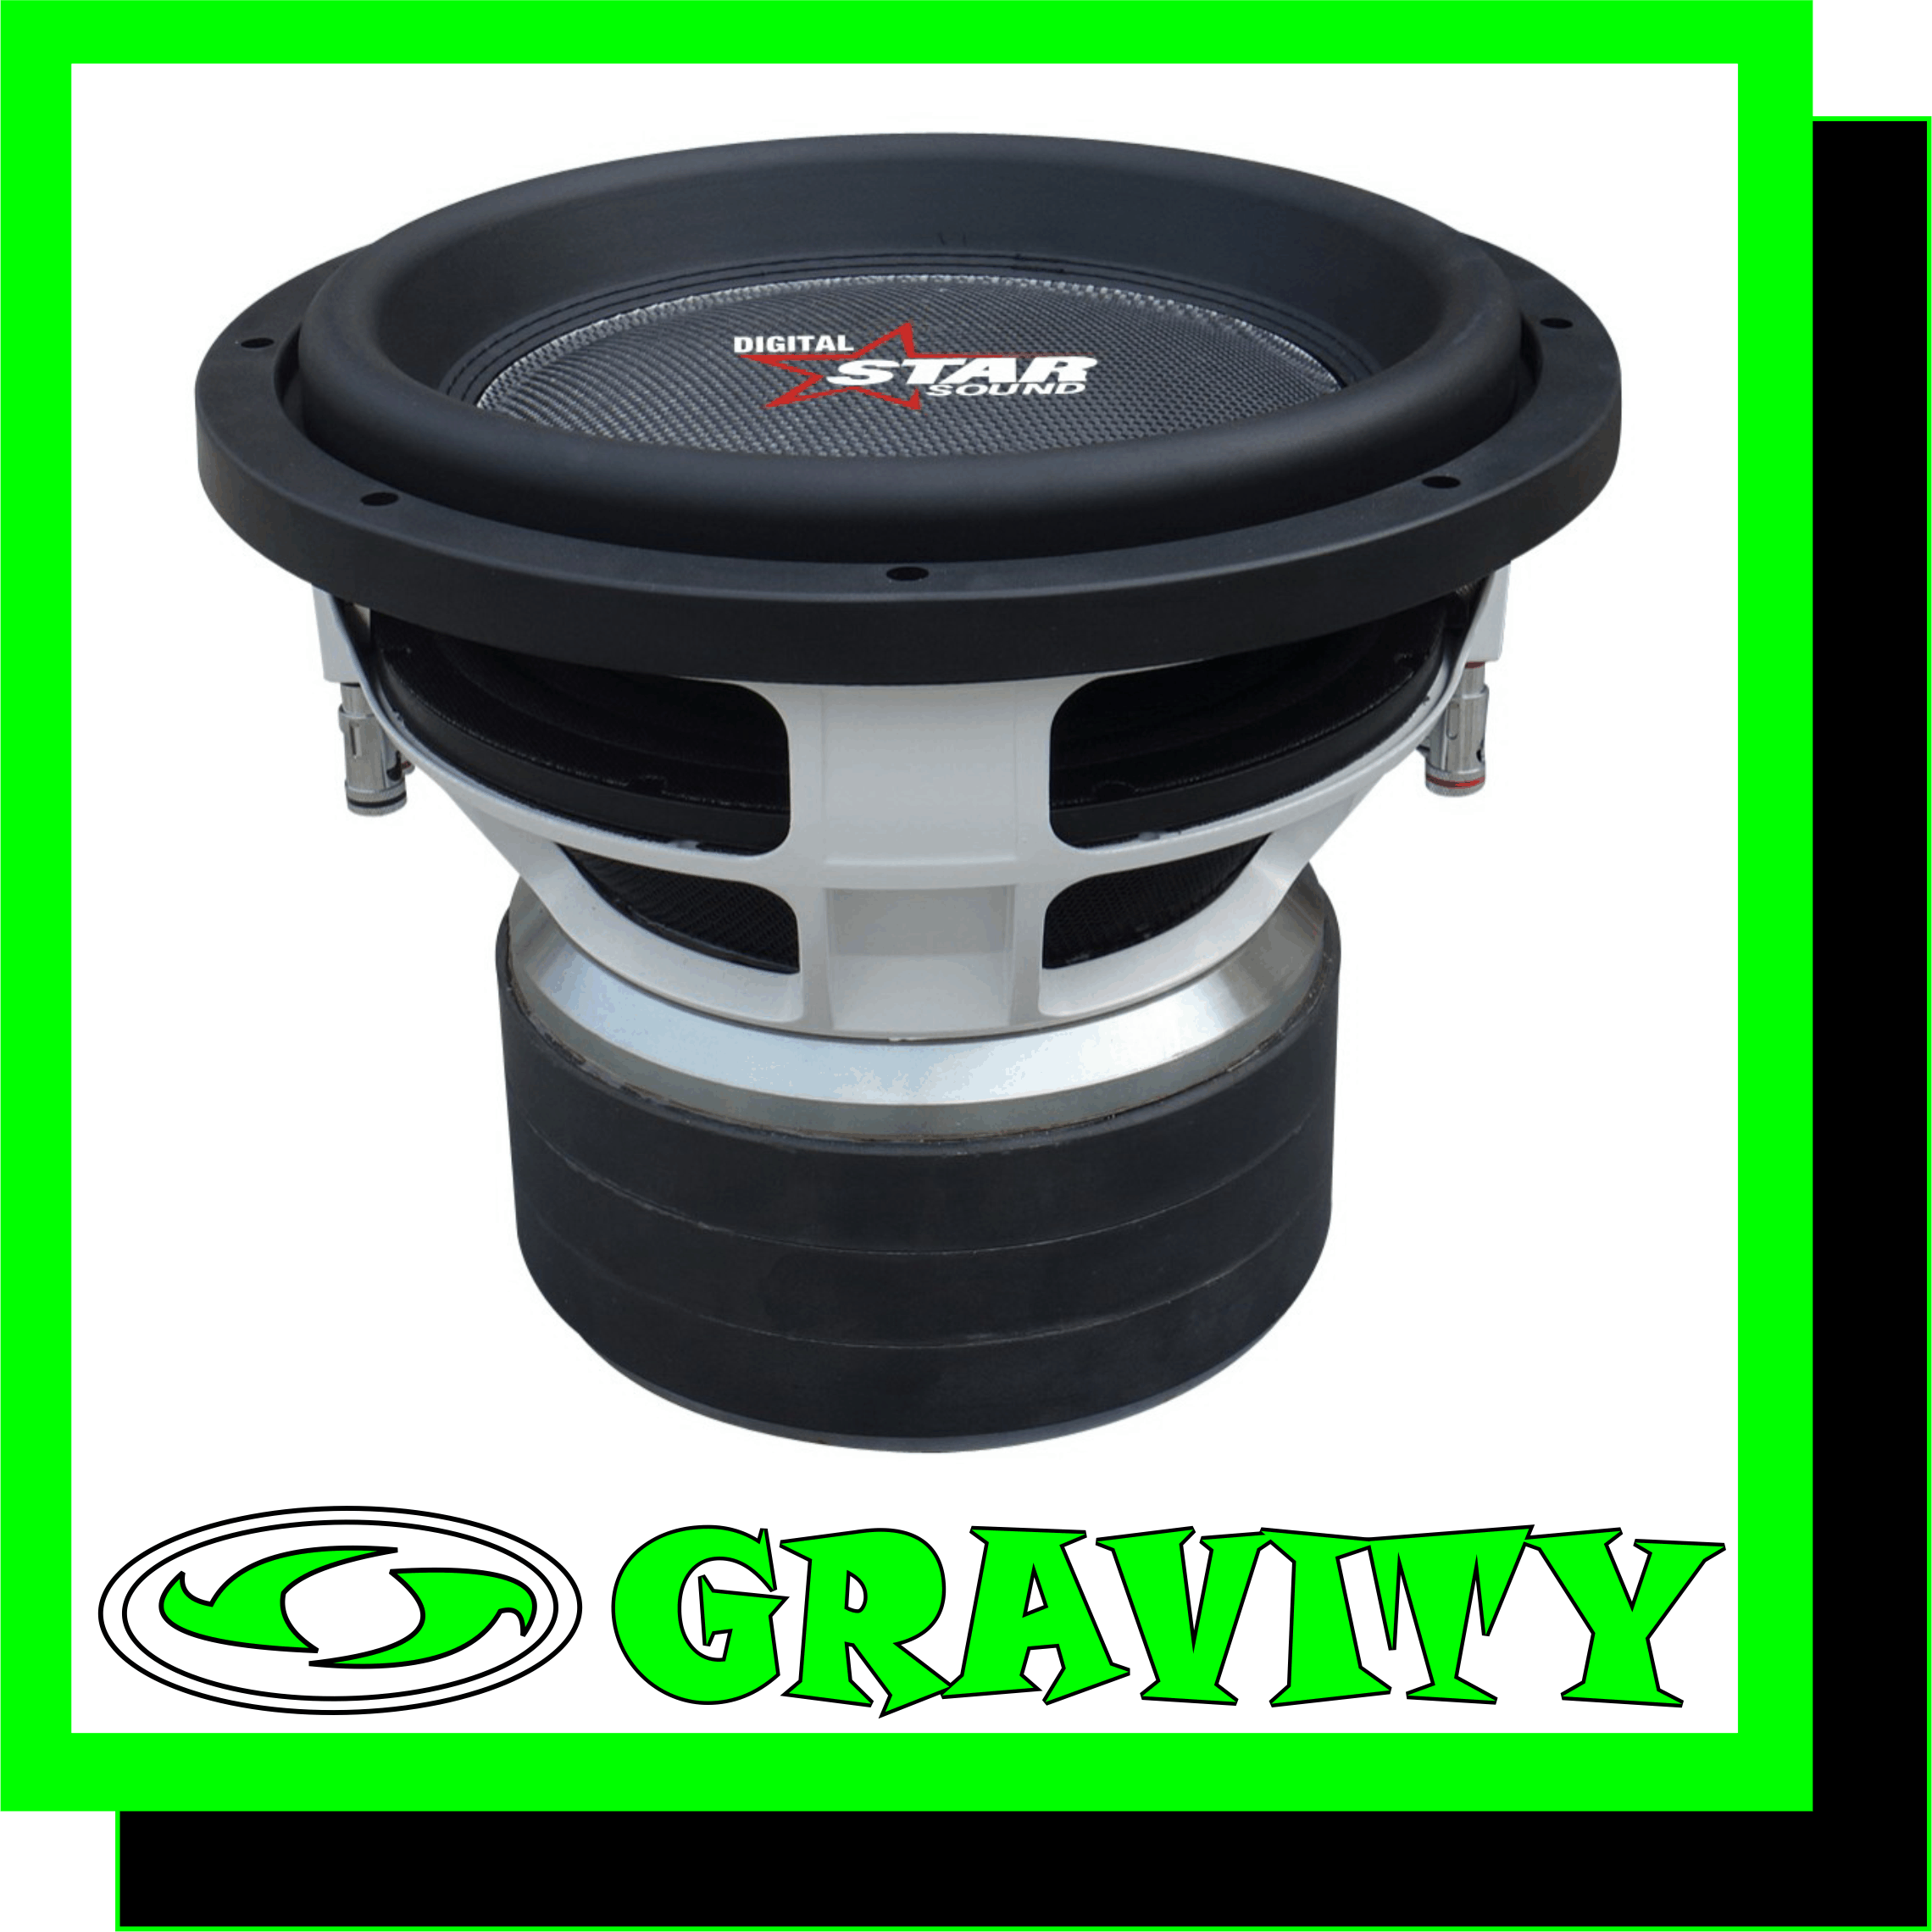 12inch Starsound Zombie  High Perfomance competition Subwoofer -1800 RMS -3000w 12inch DVC -2 ohm DVC GRAVITY AUDIO DURBAN STARSOUND PRODUCTS